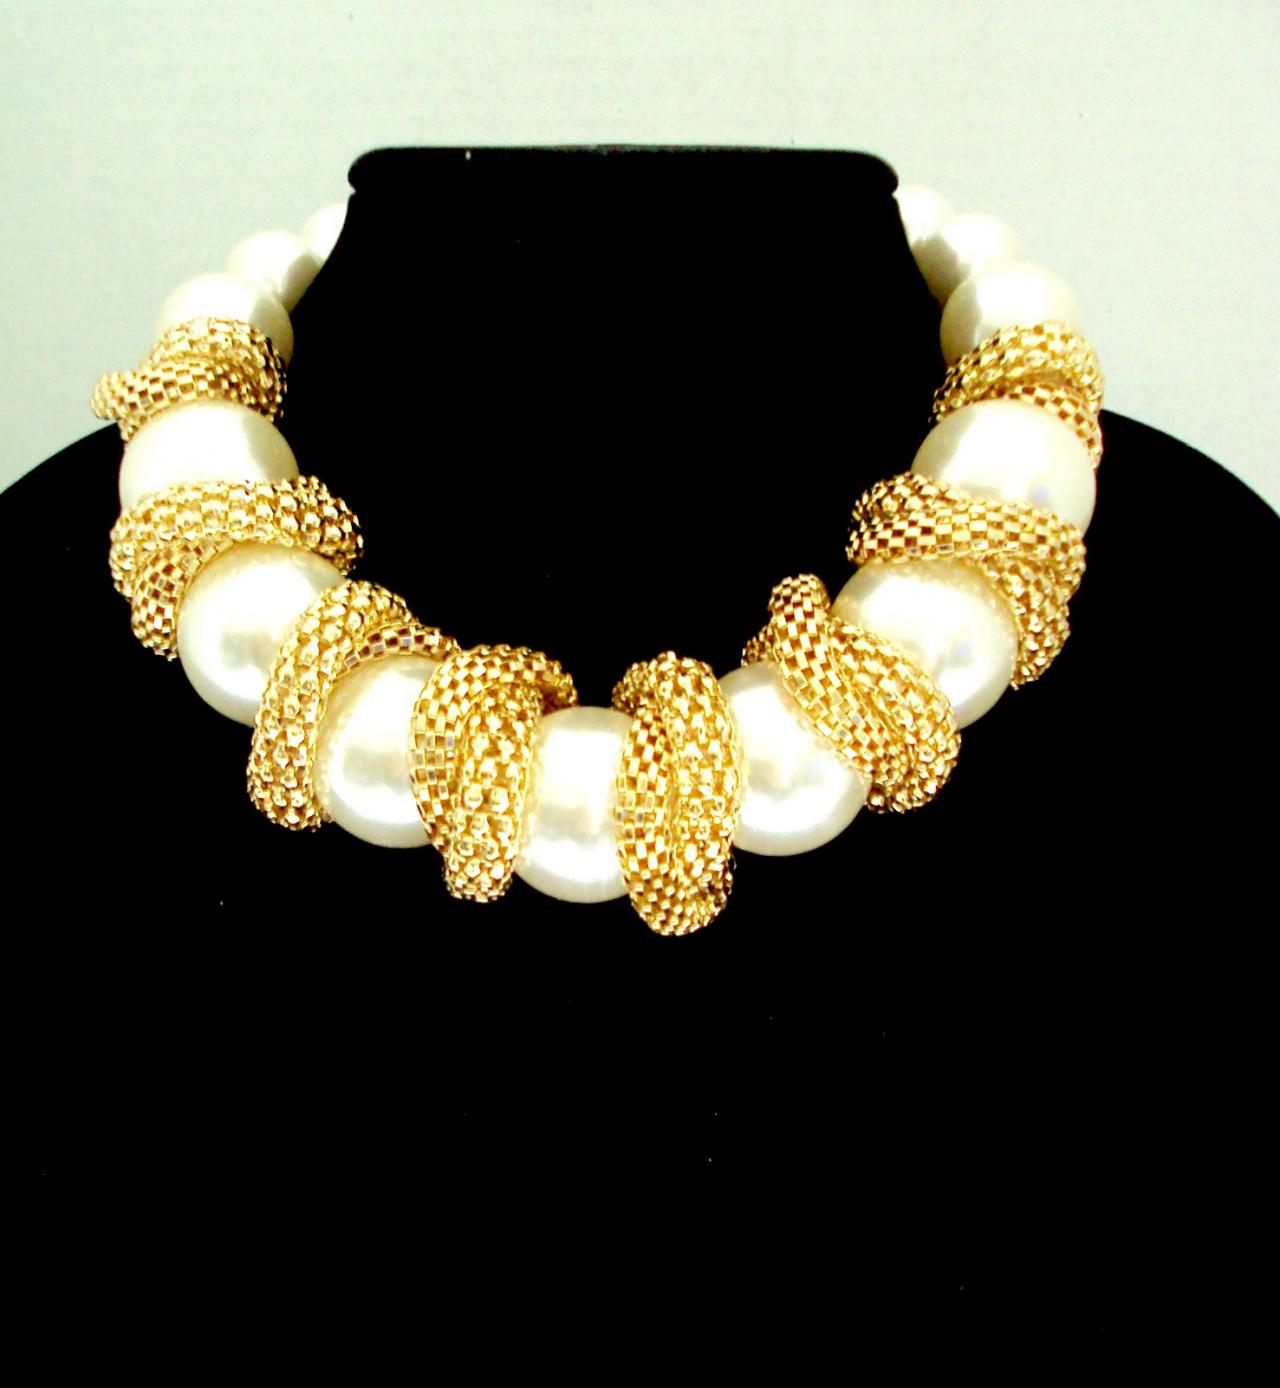 Big Pearl Statement Necklace, Big Chunky Pearl With Gold Mesh Chain, Urban Necklaces